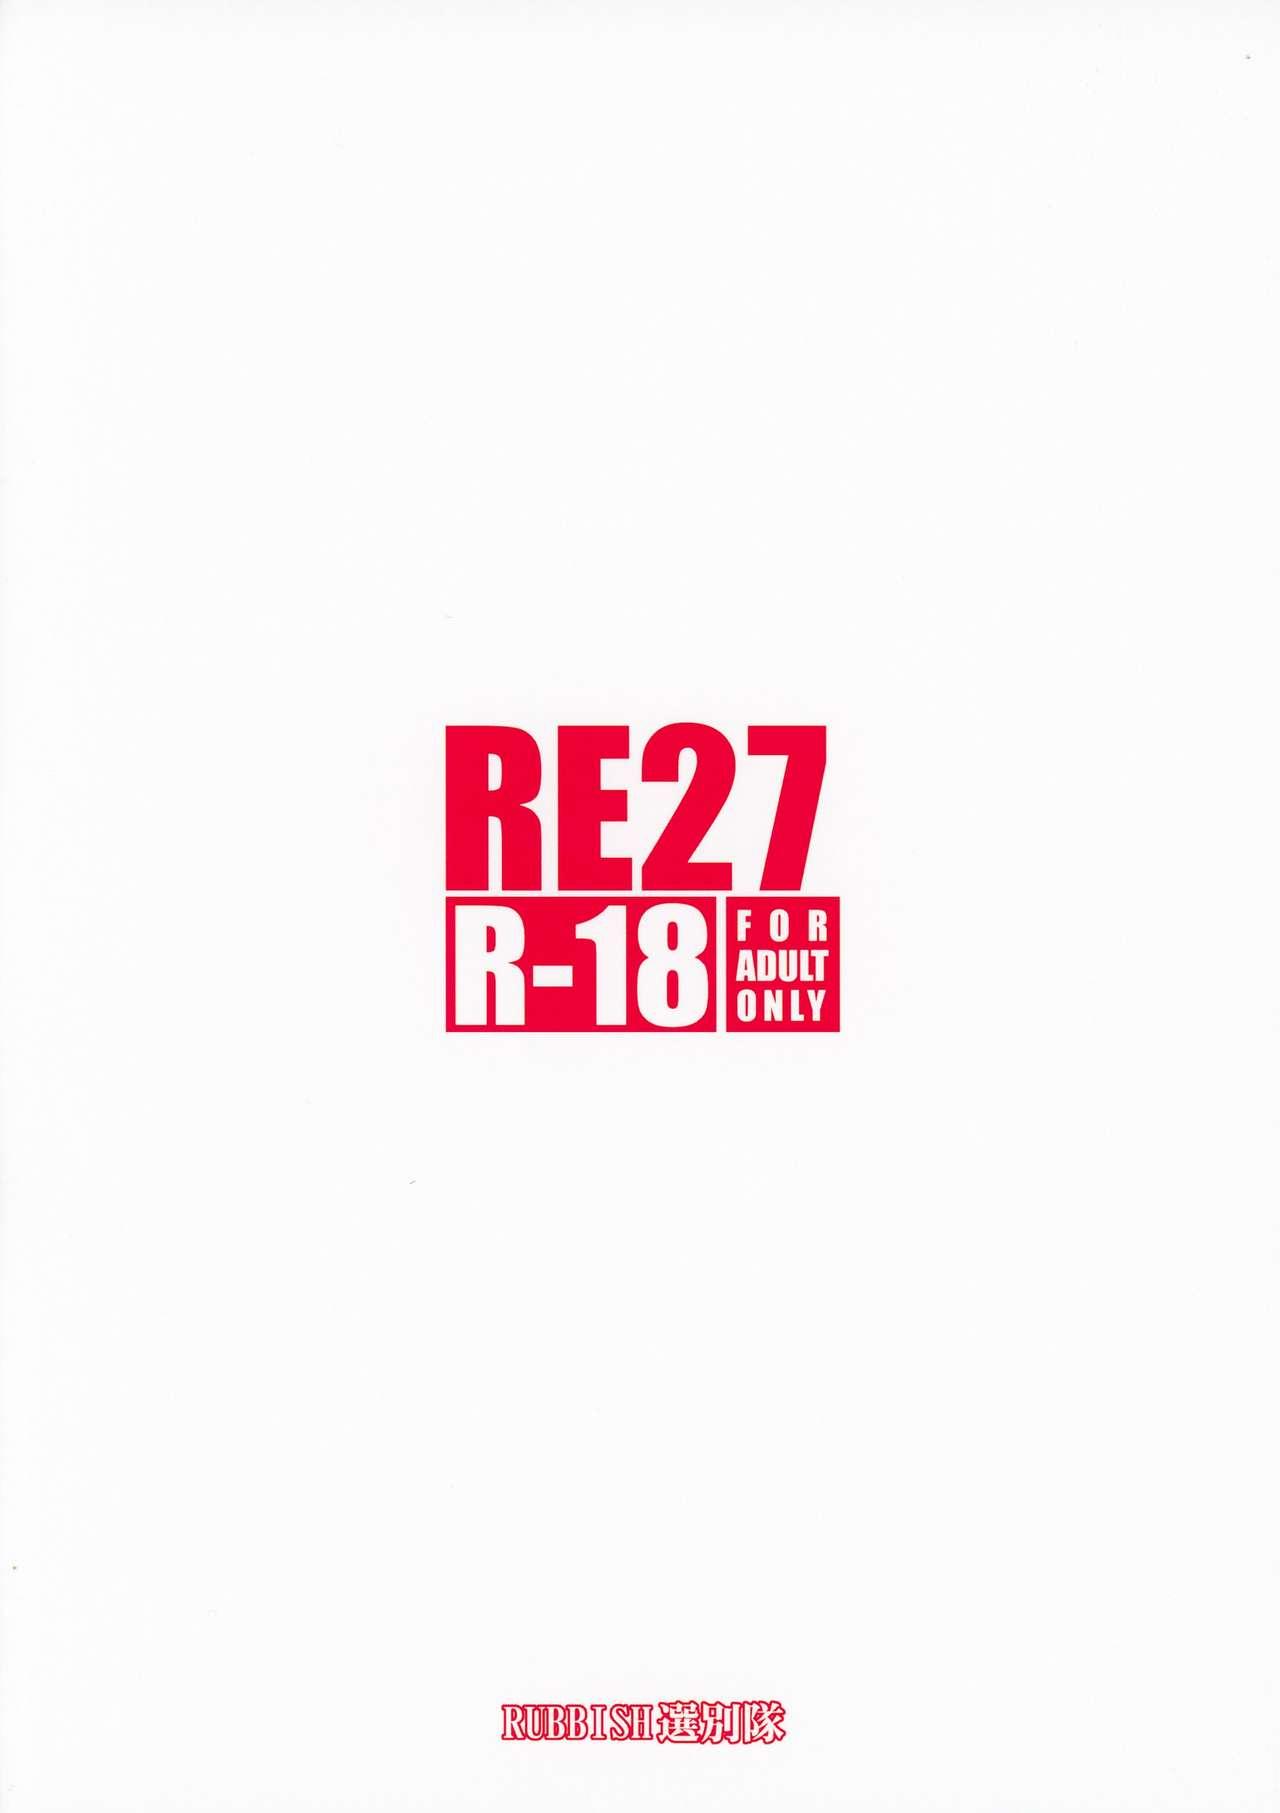 RE27 33